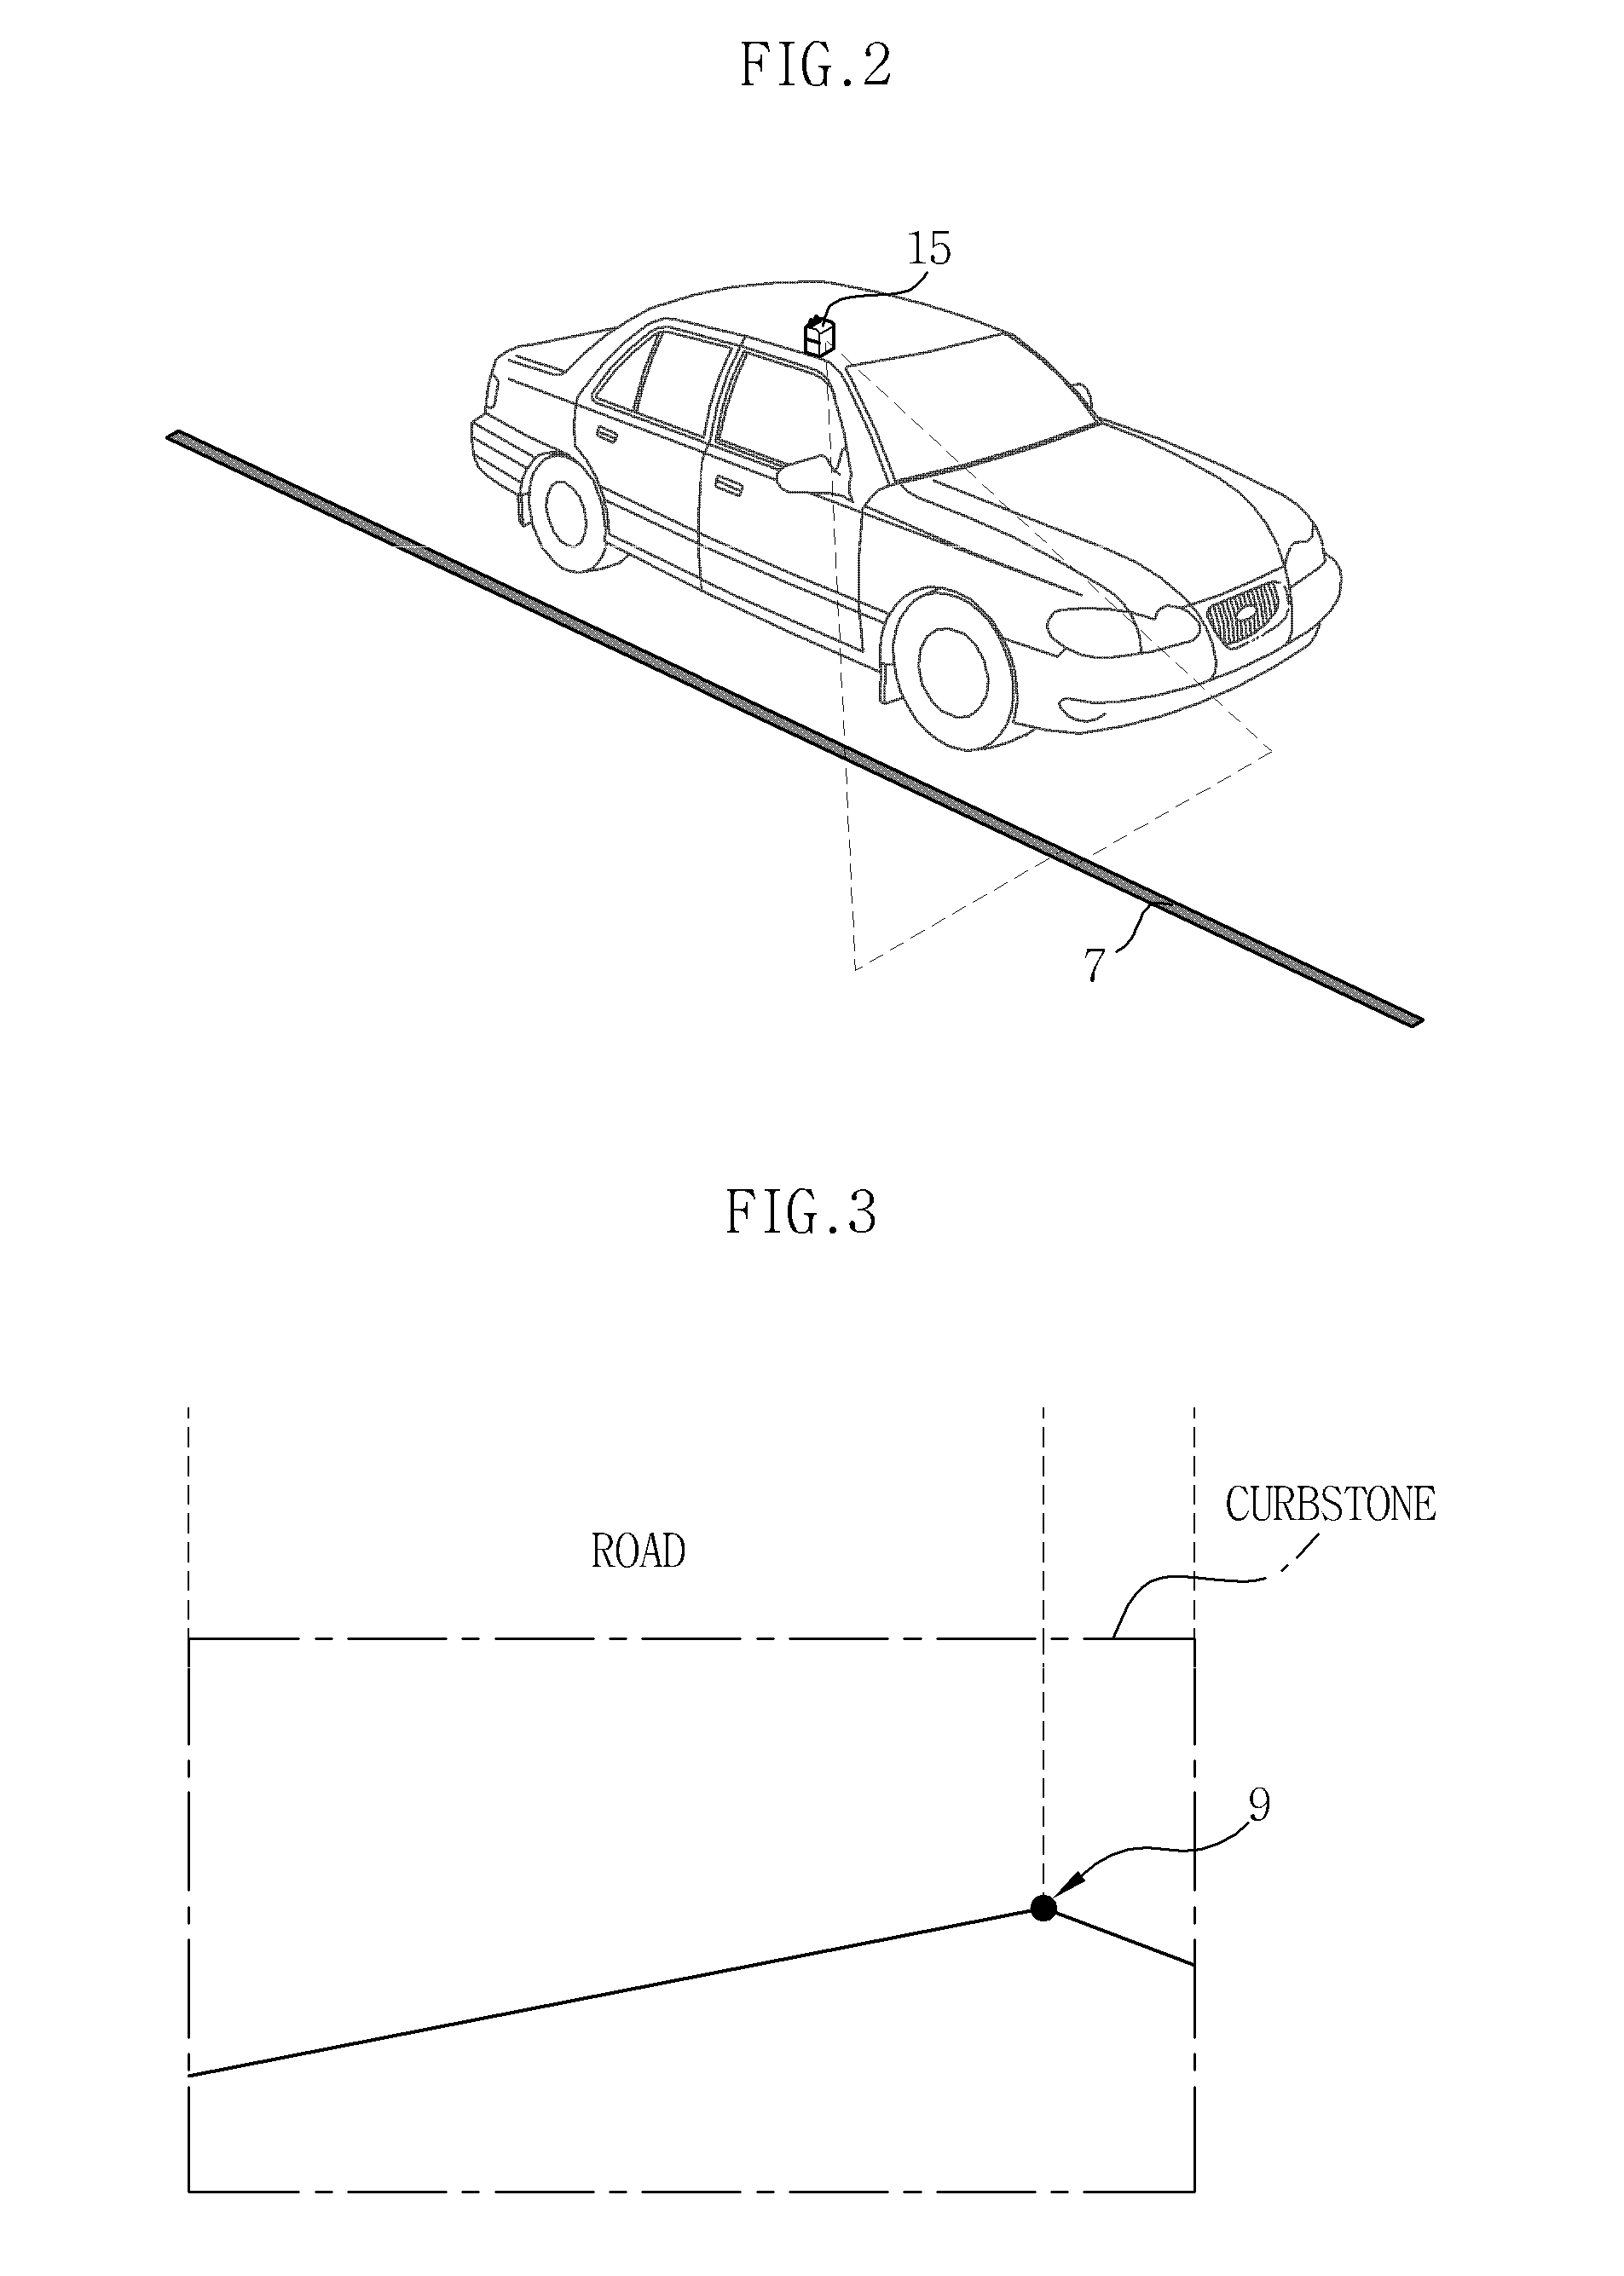 Apparatus for keeping a traffic lane and preventing lane-deviation for a vehicle and method thereof